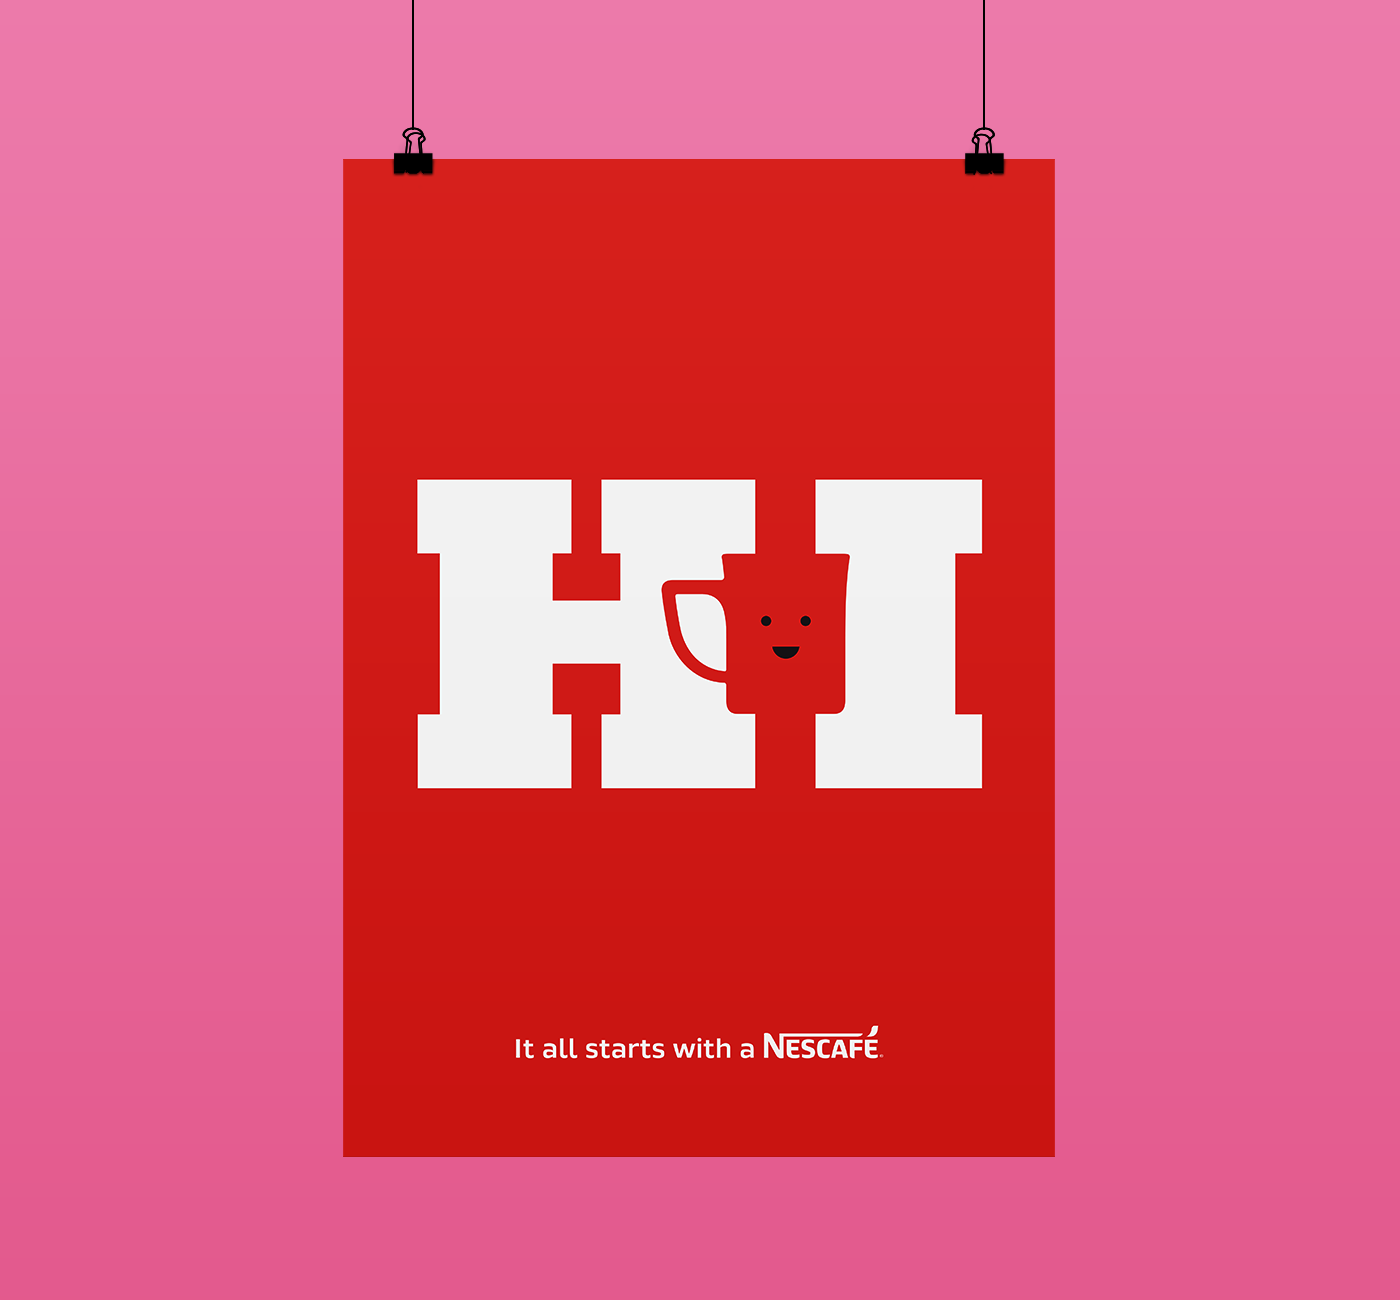 illustration_andre_levy_zhion_vector_flat_minimal_conceptual_nescafe_red_mug_campaign_launch_social_media_content_start_conversation_poster.png